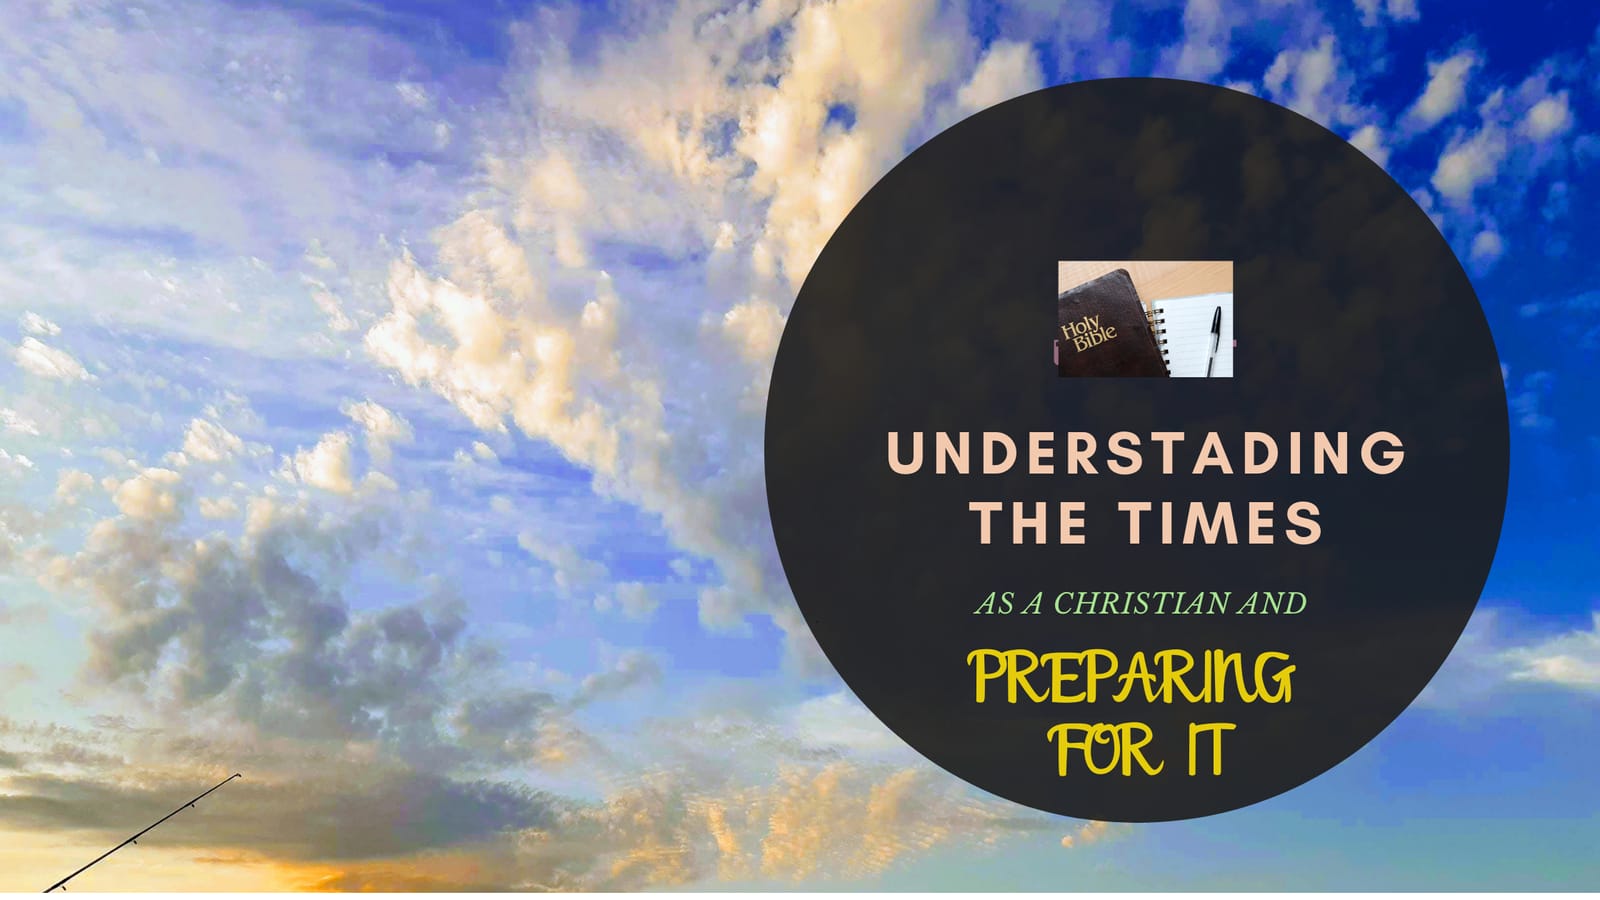 You are currently viewing UNDERSTANDING THE TIMES AS A CHRISTIAN AND PREPARING FOR IT